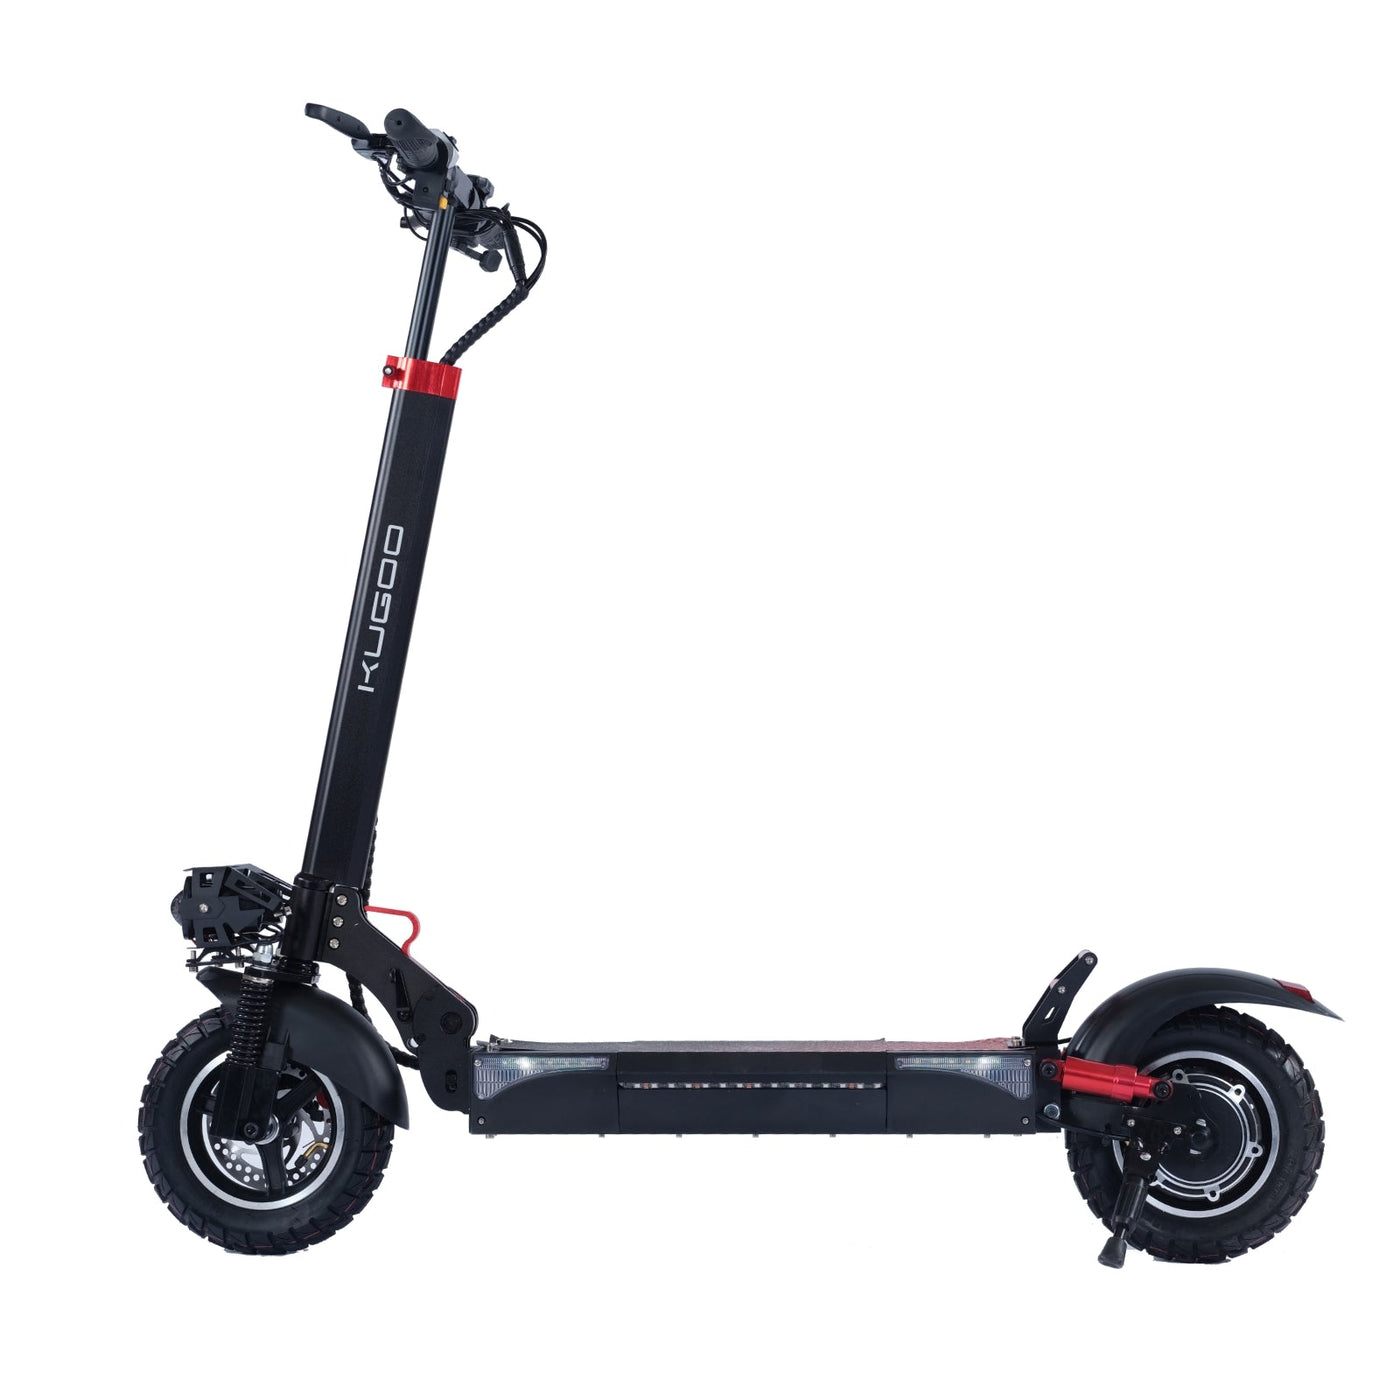 Kugoo M4 Pro available online, recent upgrade to its folding mechanism and  stem! 🛴 #electricscooter #electricscootersireland…